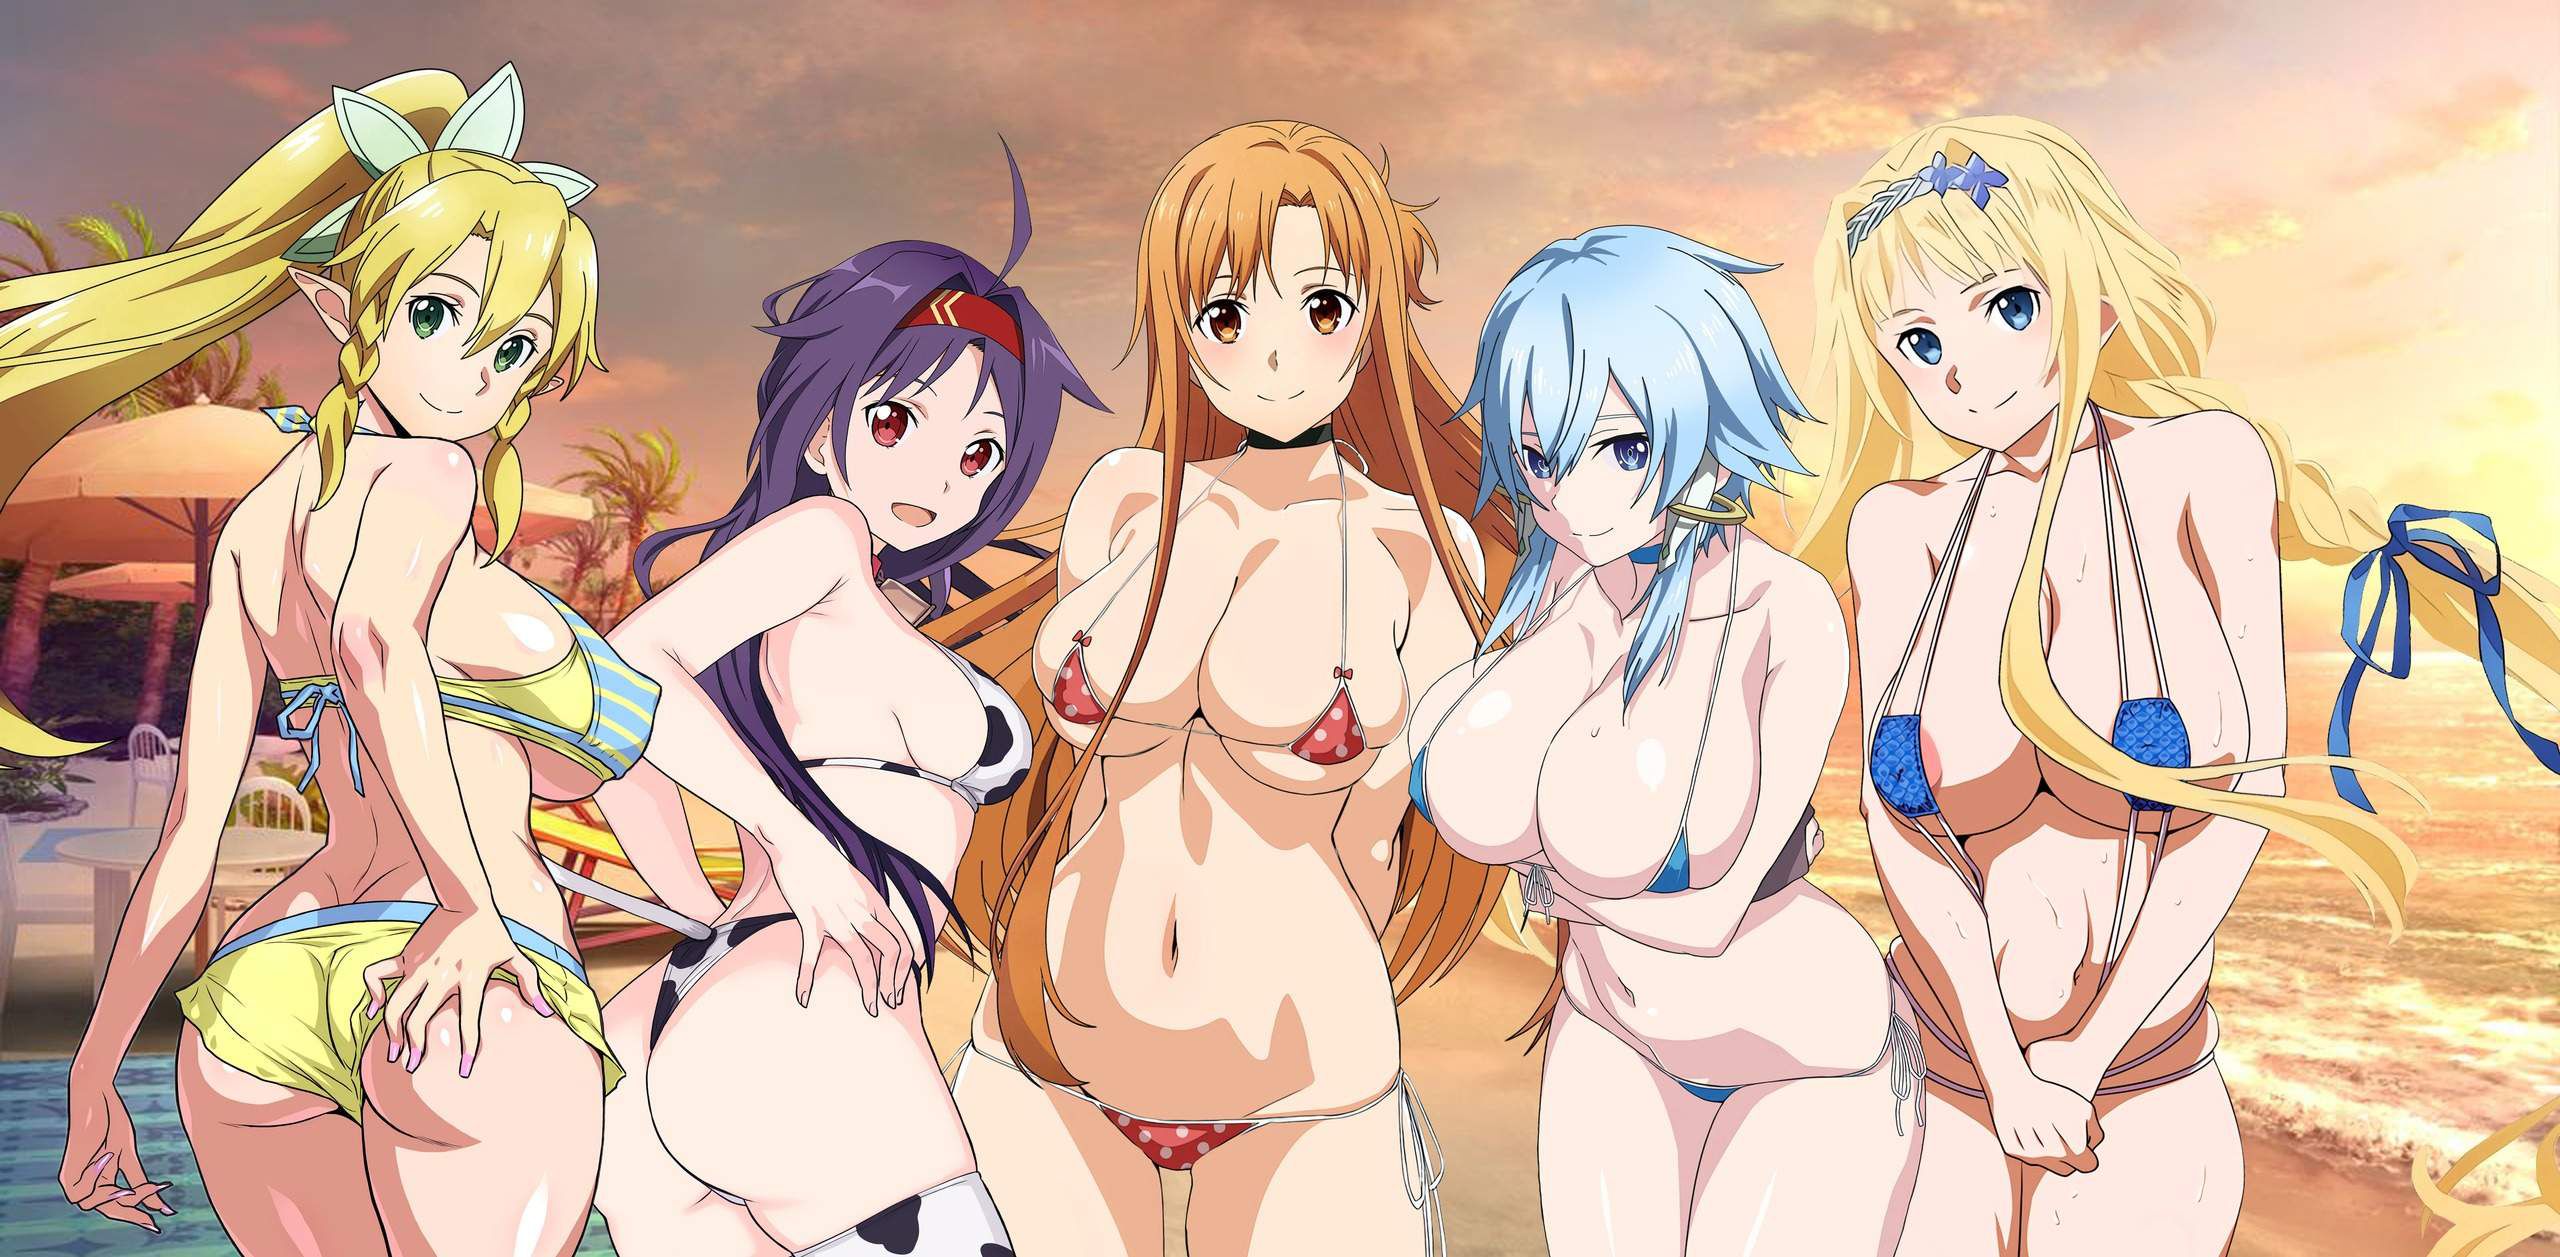 [Sword Art Online (SAO)] Erotic images such as Asuna-chan 75th 15